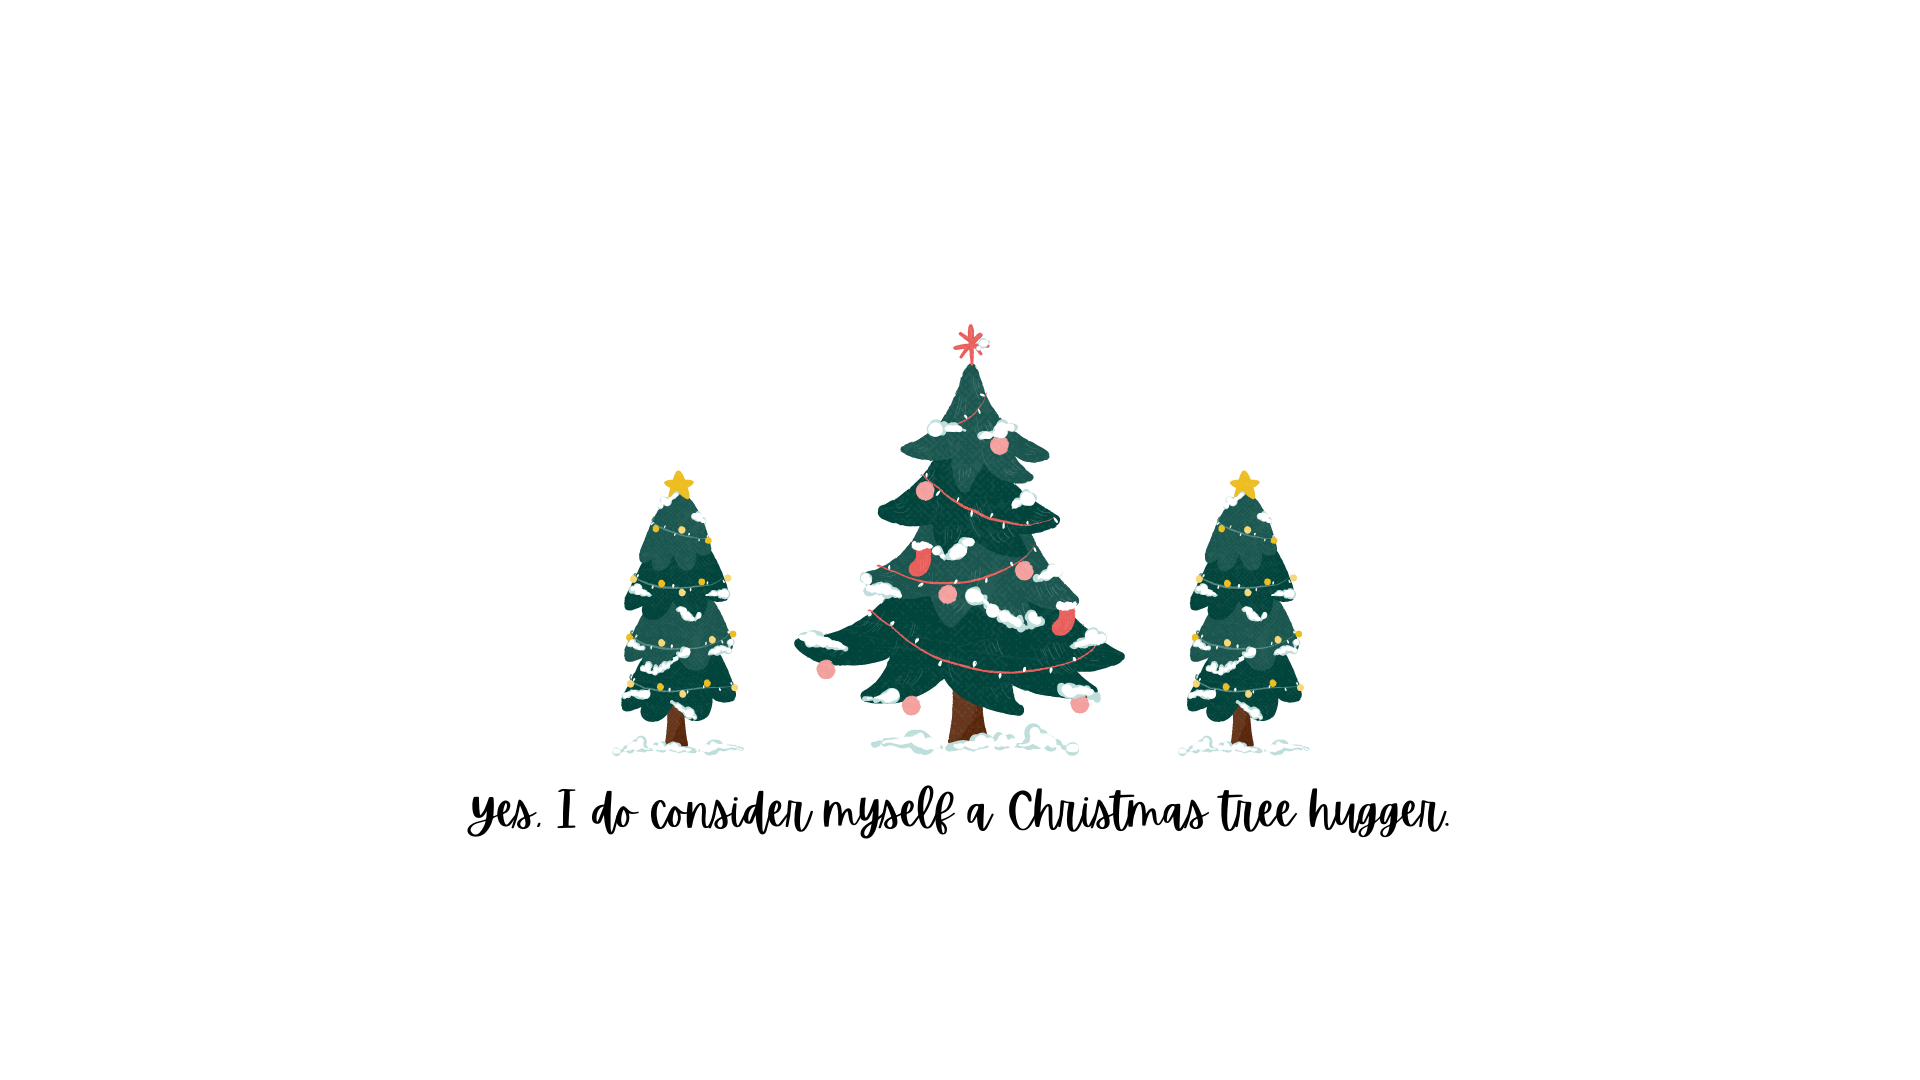 Christmas Aesthetic Wallpaper FREEBIES; Free Christmas desktop backgrounds to download and use today!